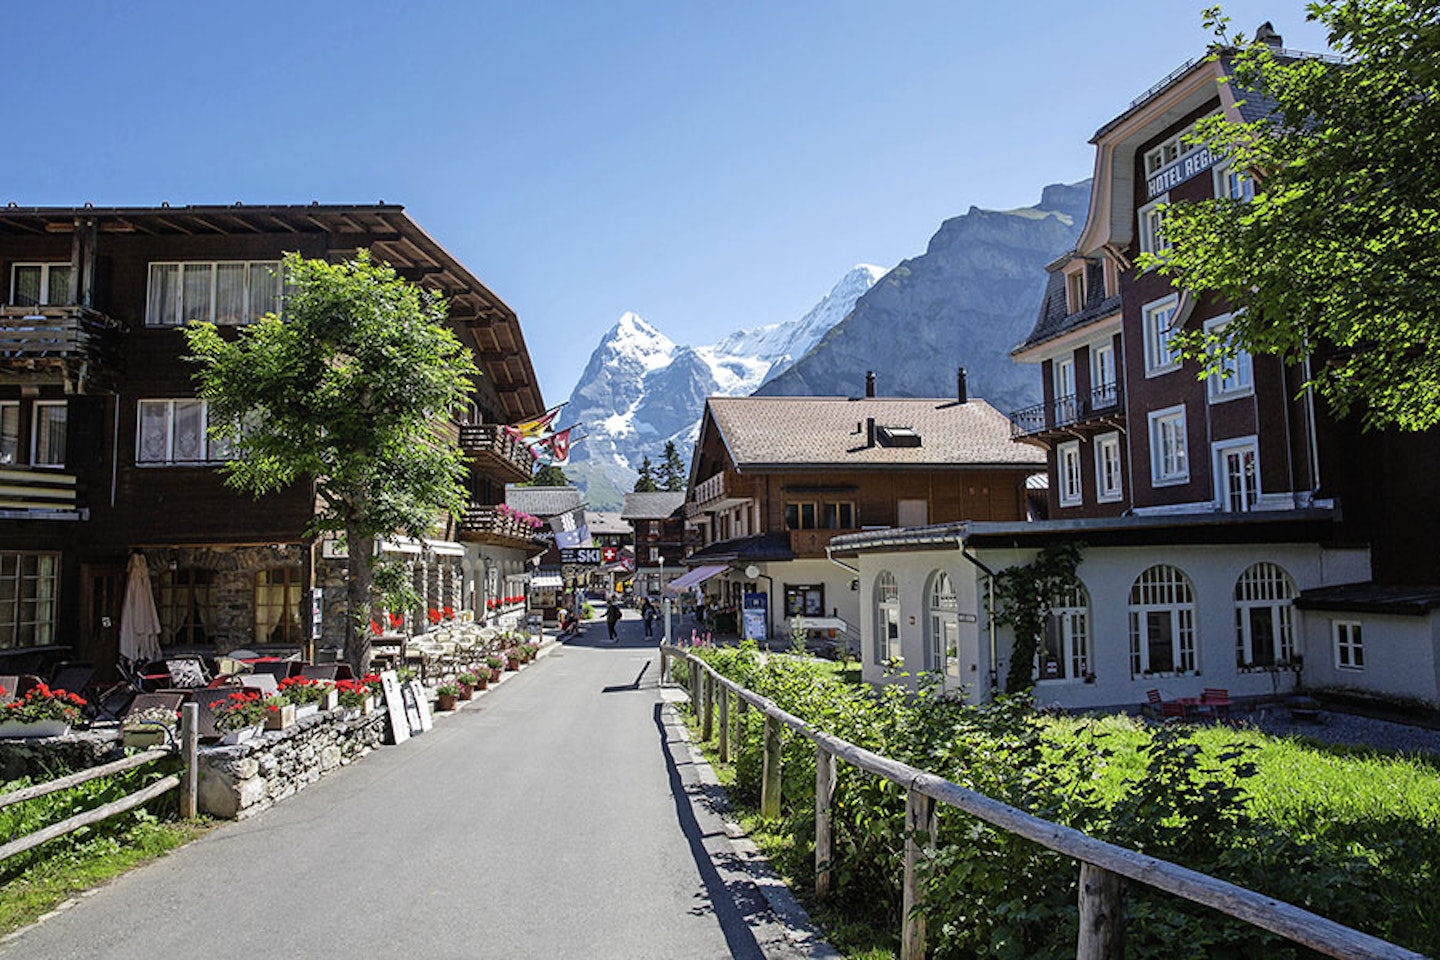 The car-free streets of Mürren.